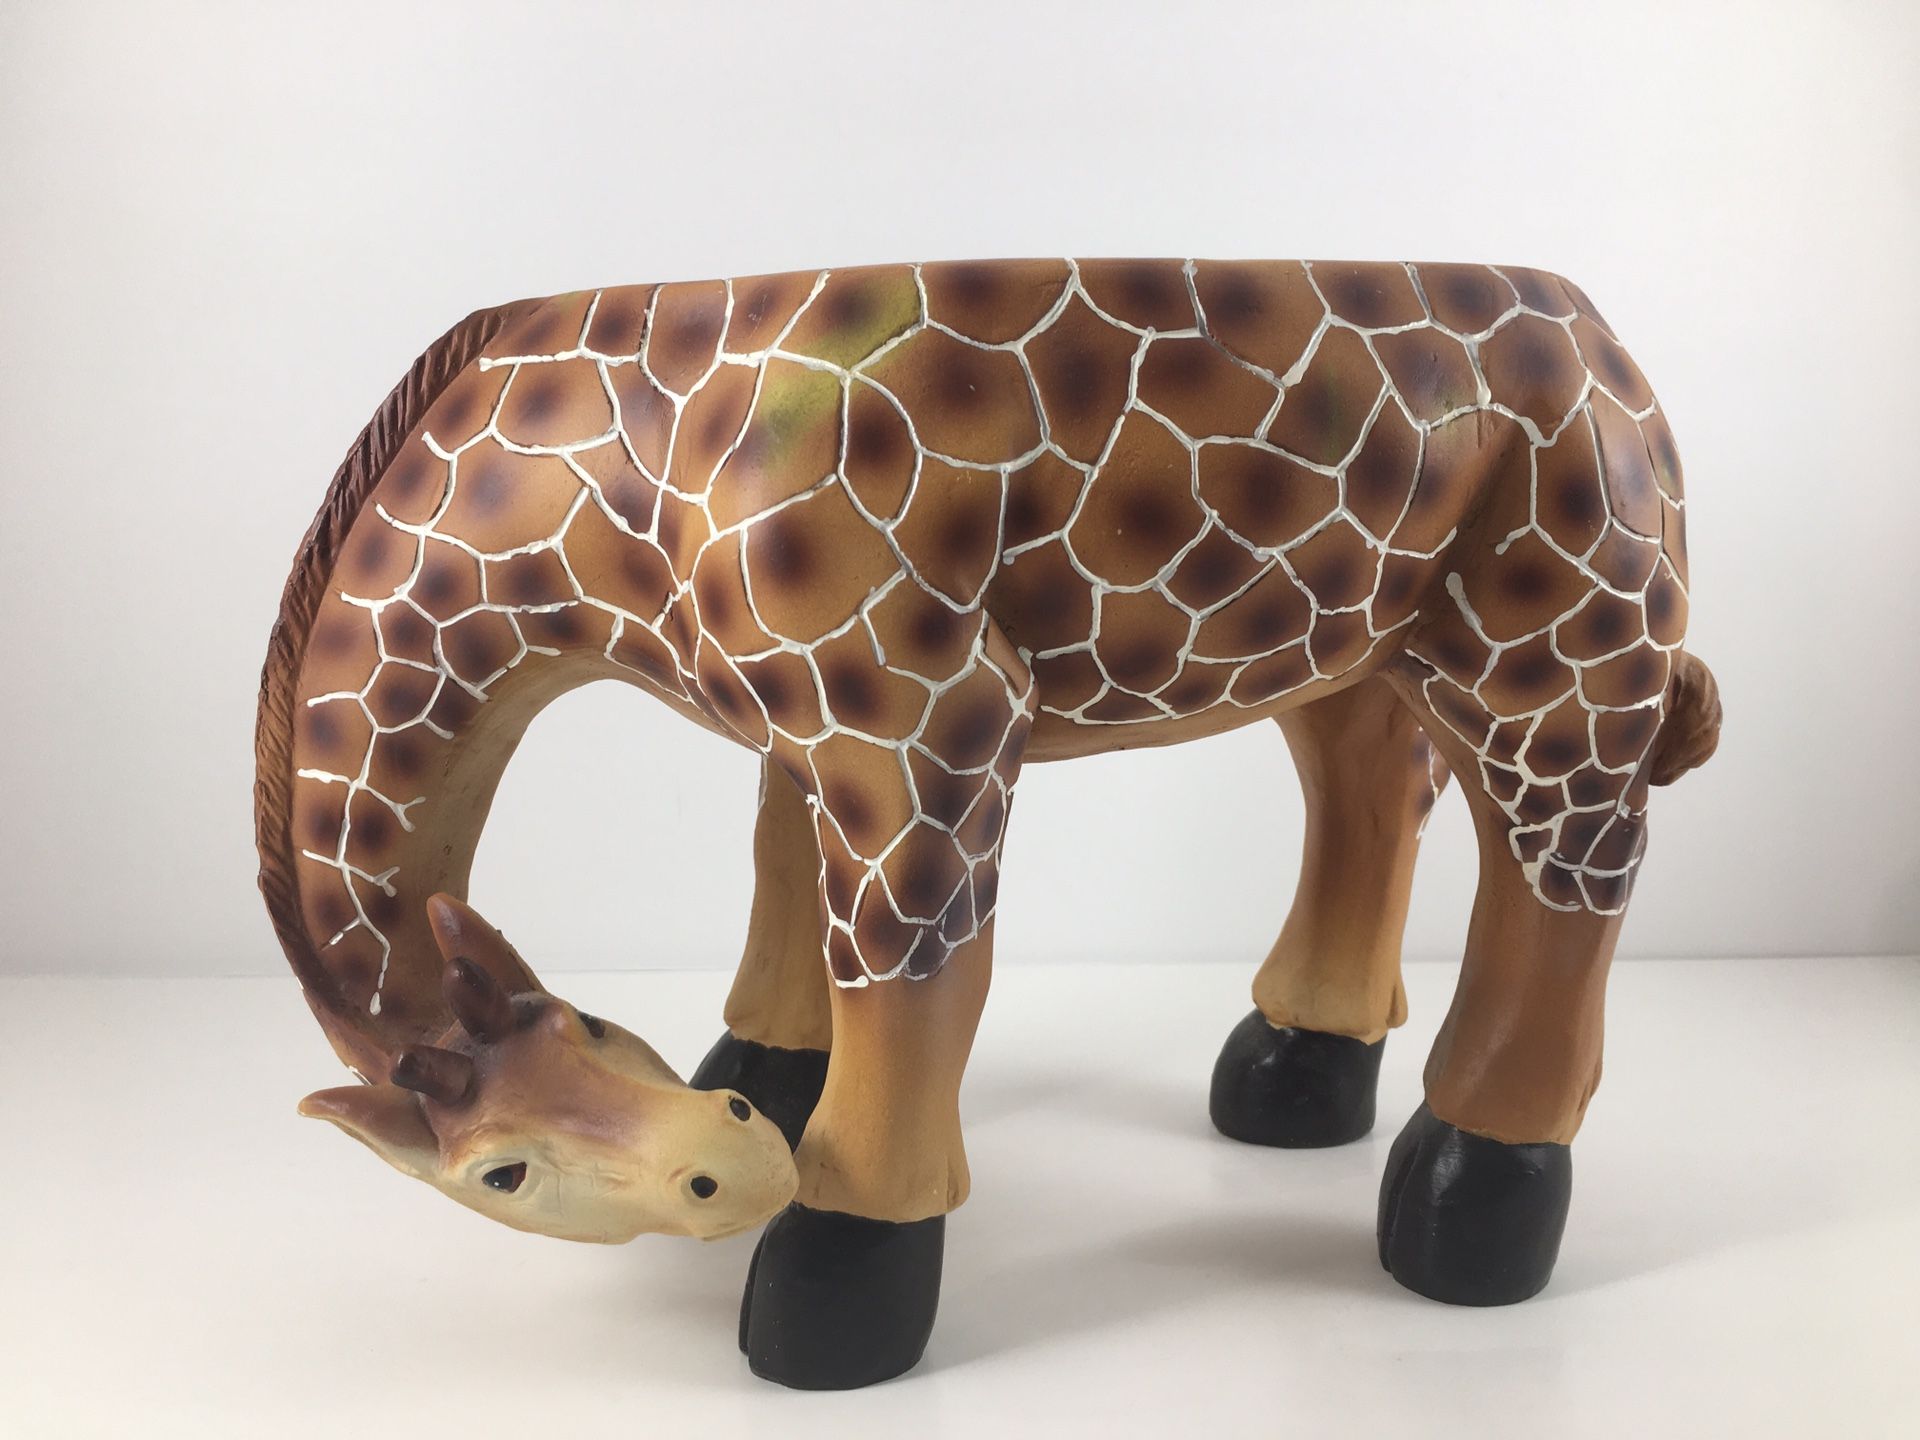 Adorable Giraffe Stand for a Plant